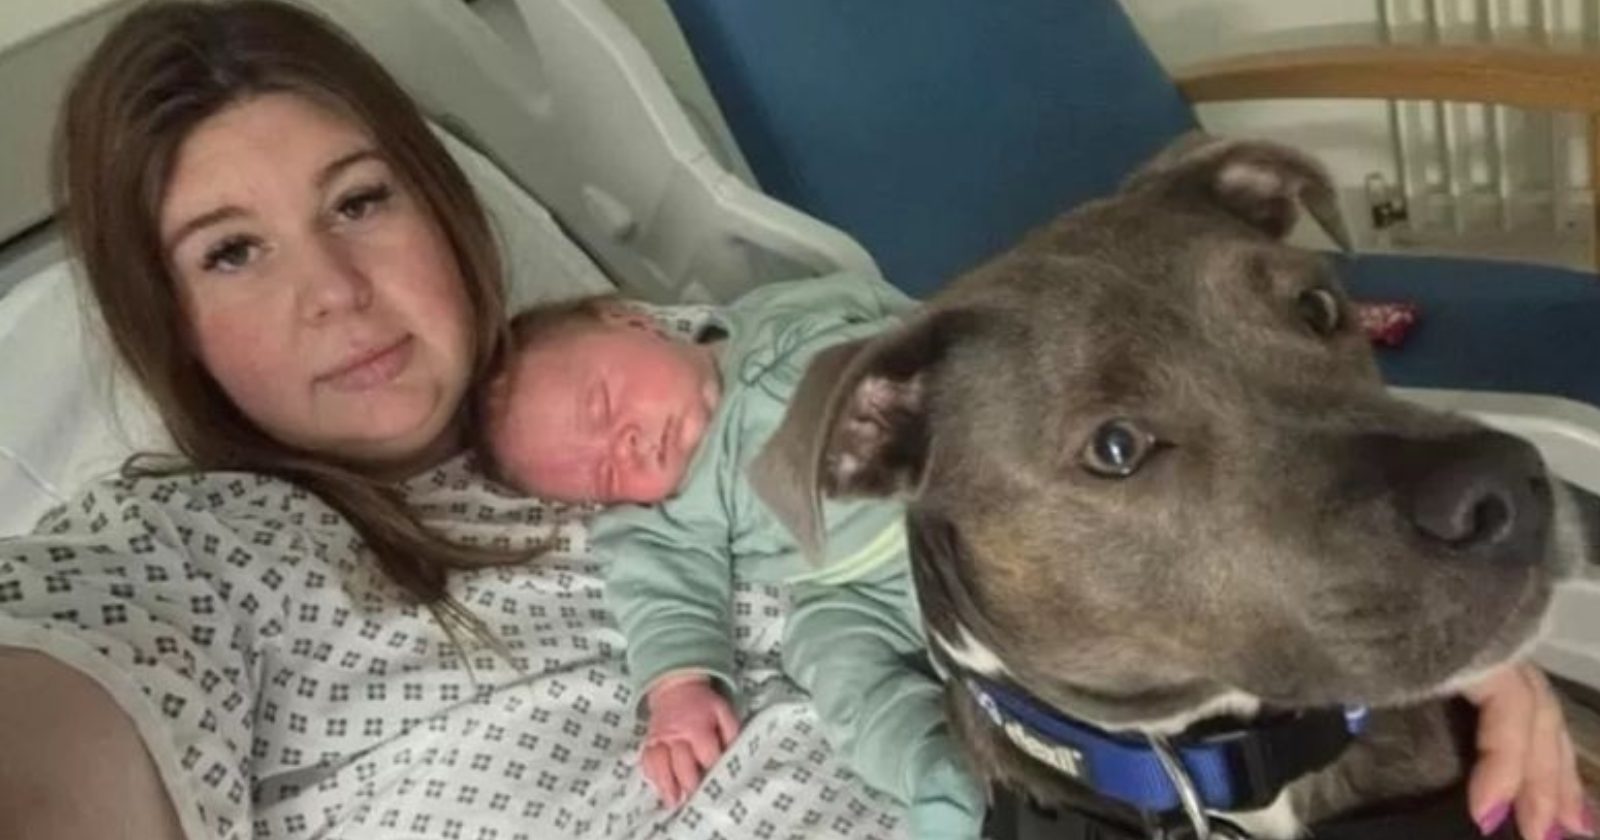 A puppy who helped her autistic owner give birth has won a Pet of the Year award